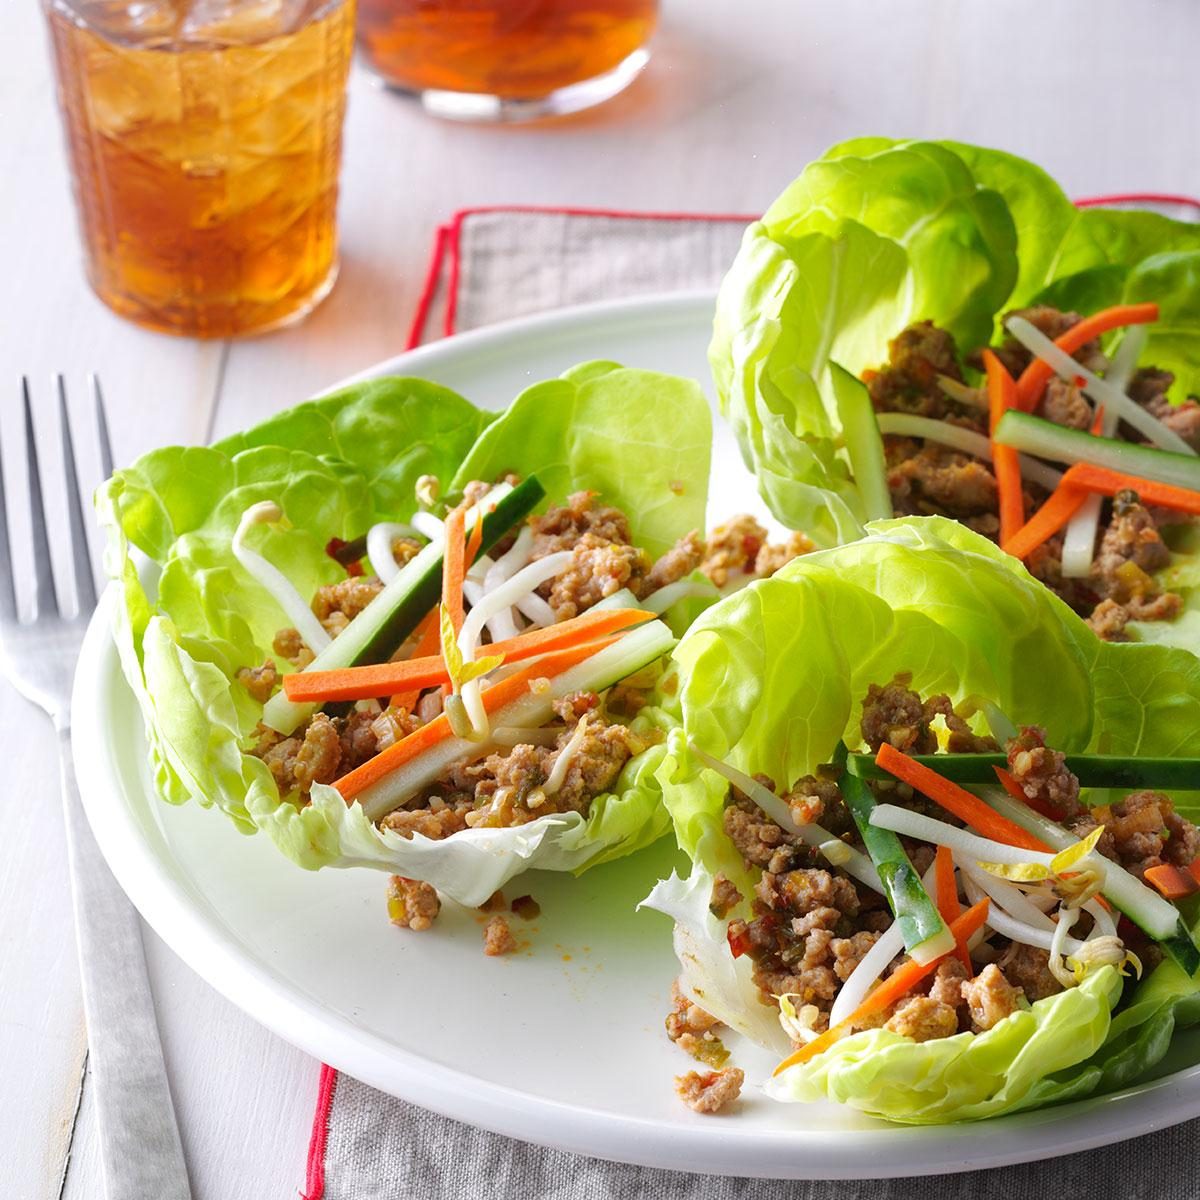 Inspired by: PF Chang’s Lettuce Wraps